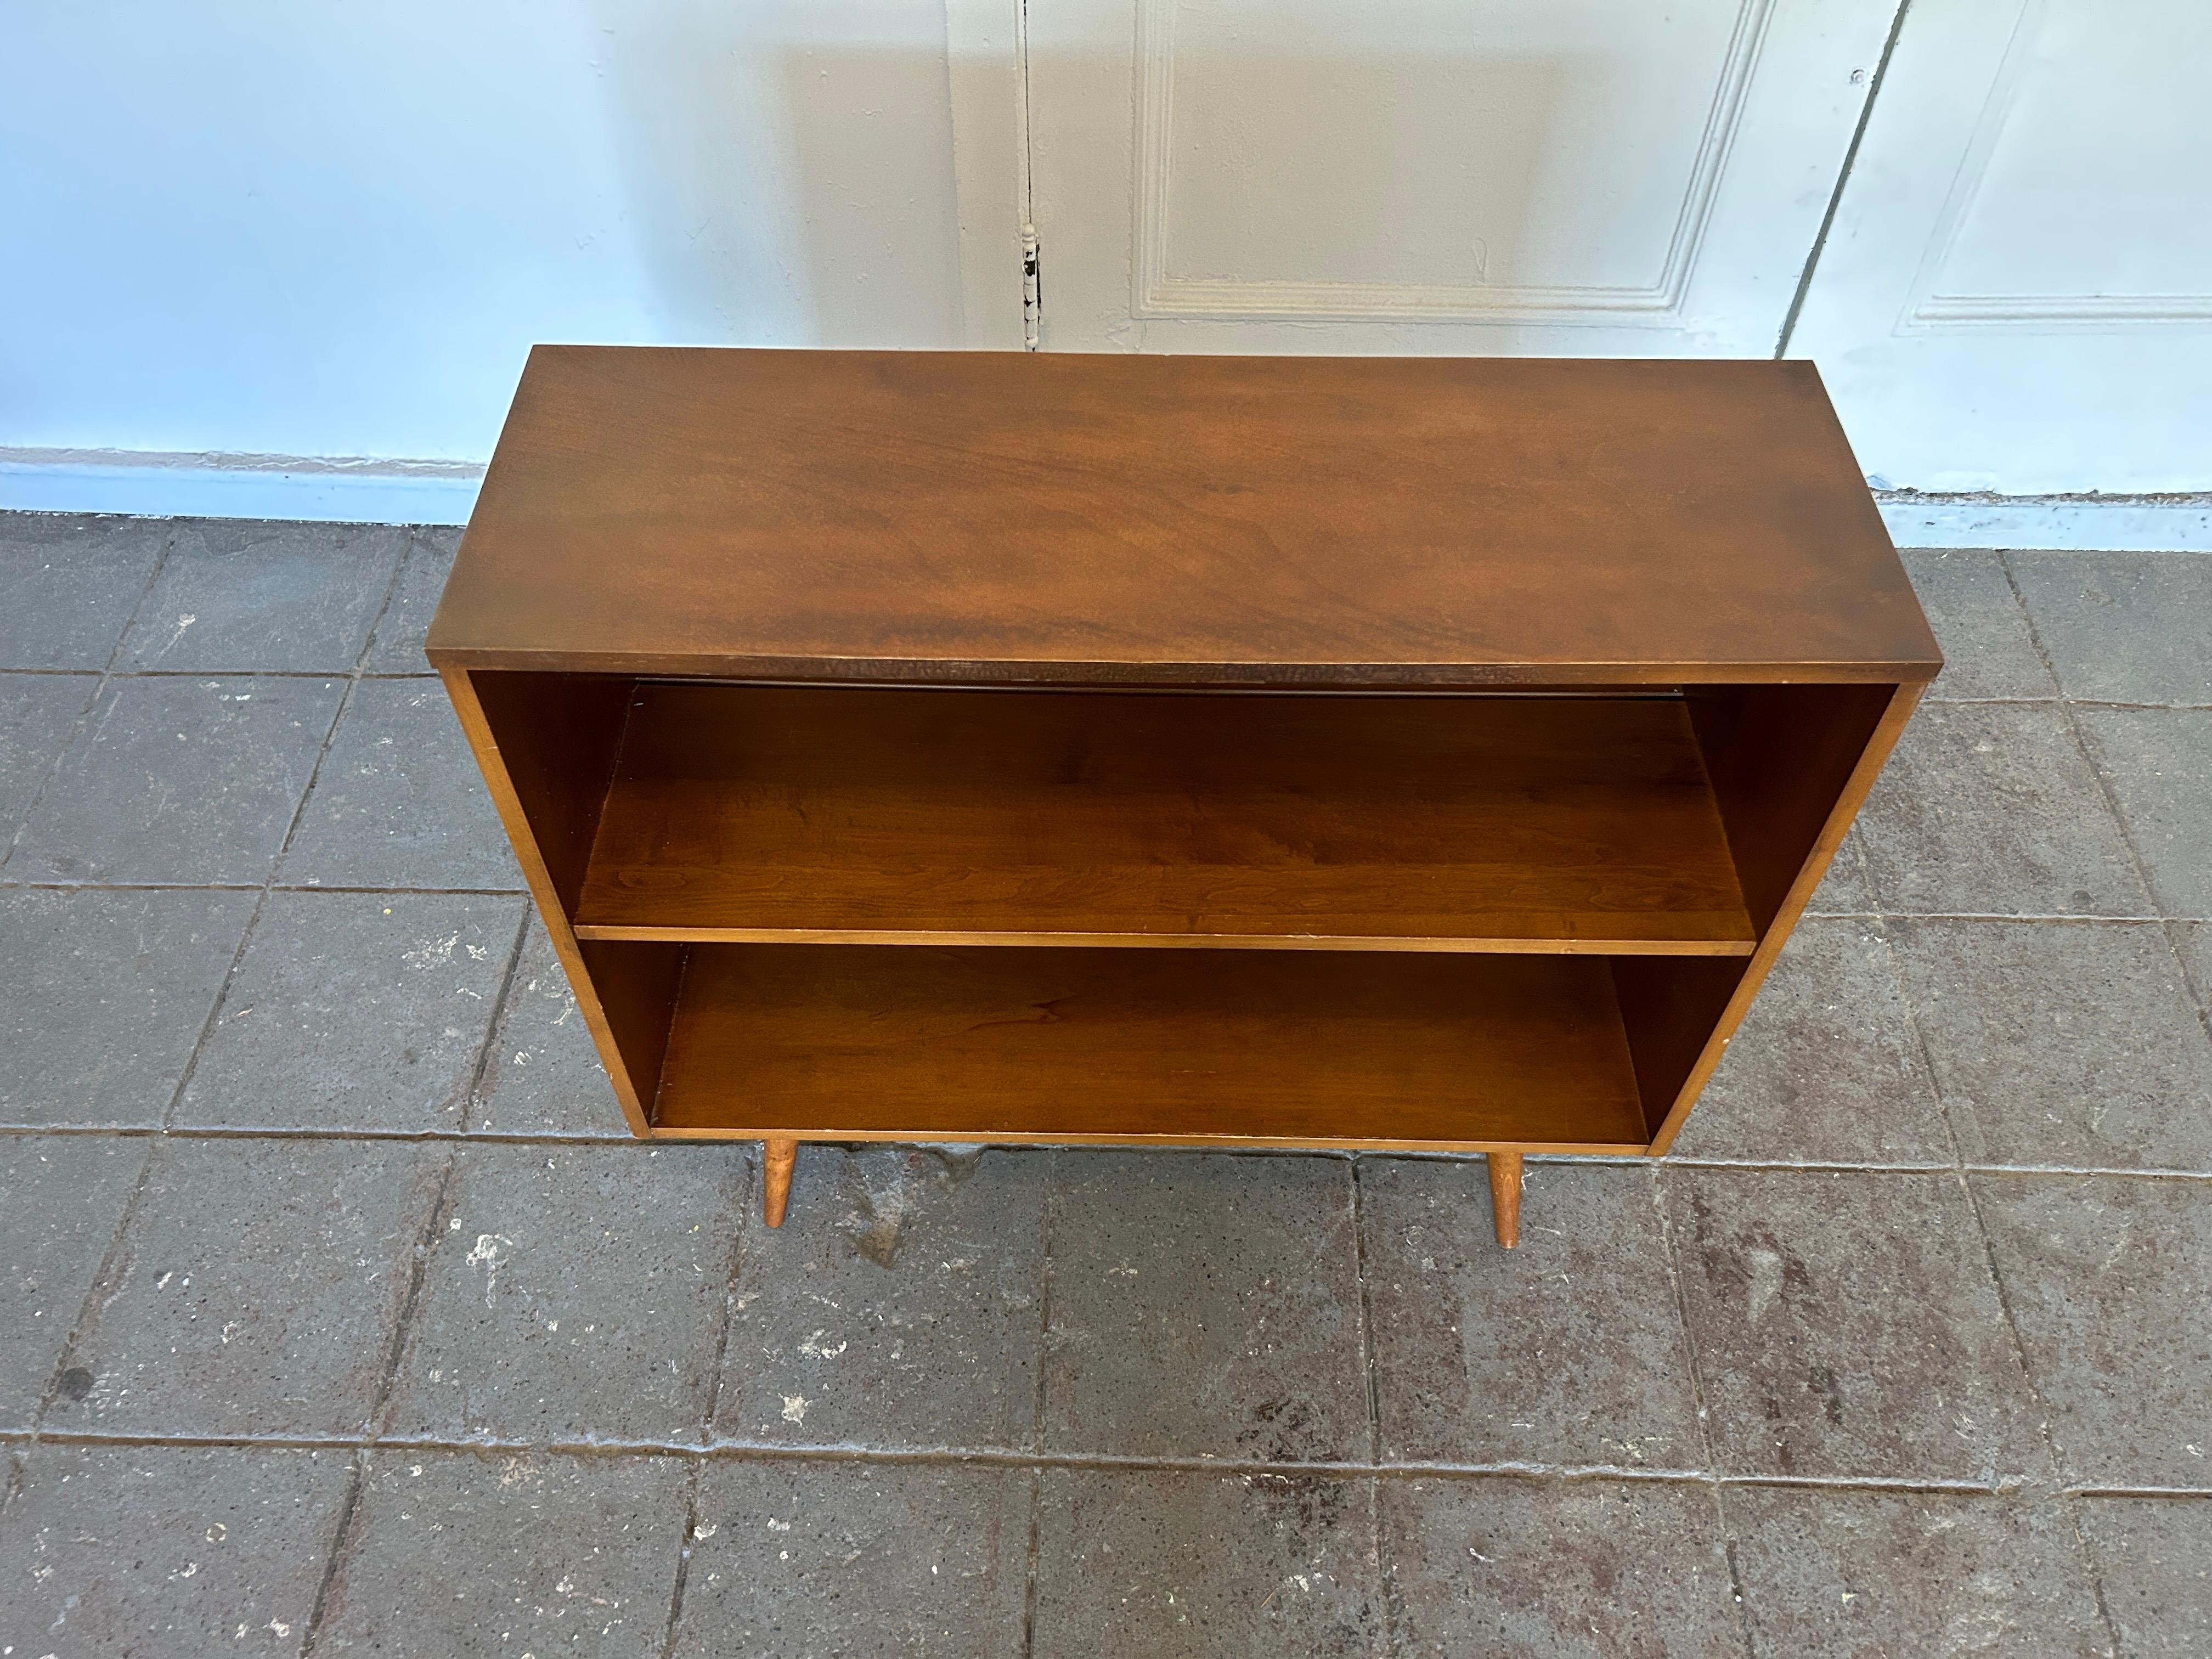 Vintage midcentury Paul McCobb single bookcase #1516 solid maple with original walnut finish on 4 tapered legs. Beautiful bookcase by Paul McCobb circa 1950s Planner Group, single center shelf fixed position, solid maple construction. Original